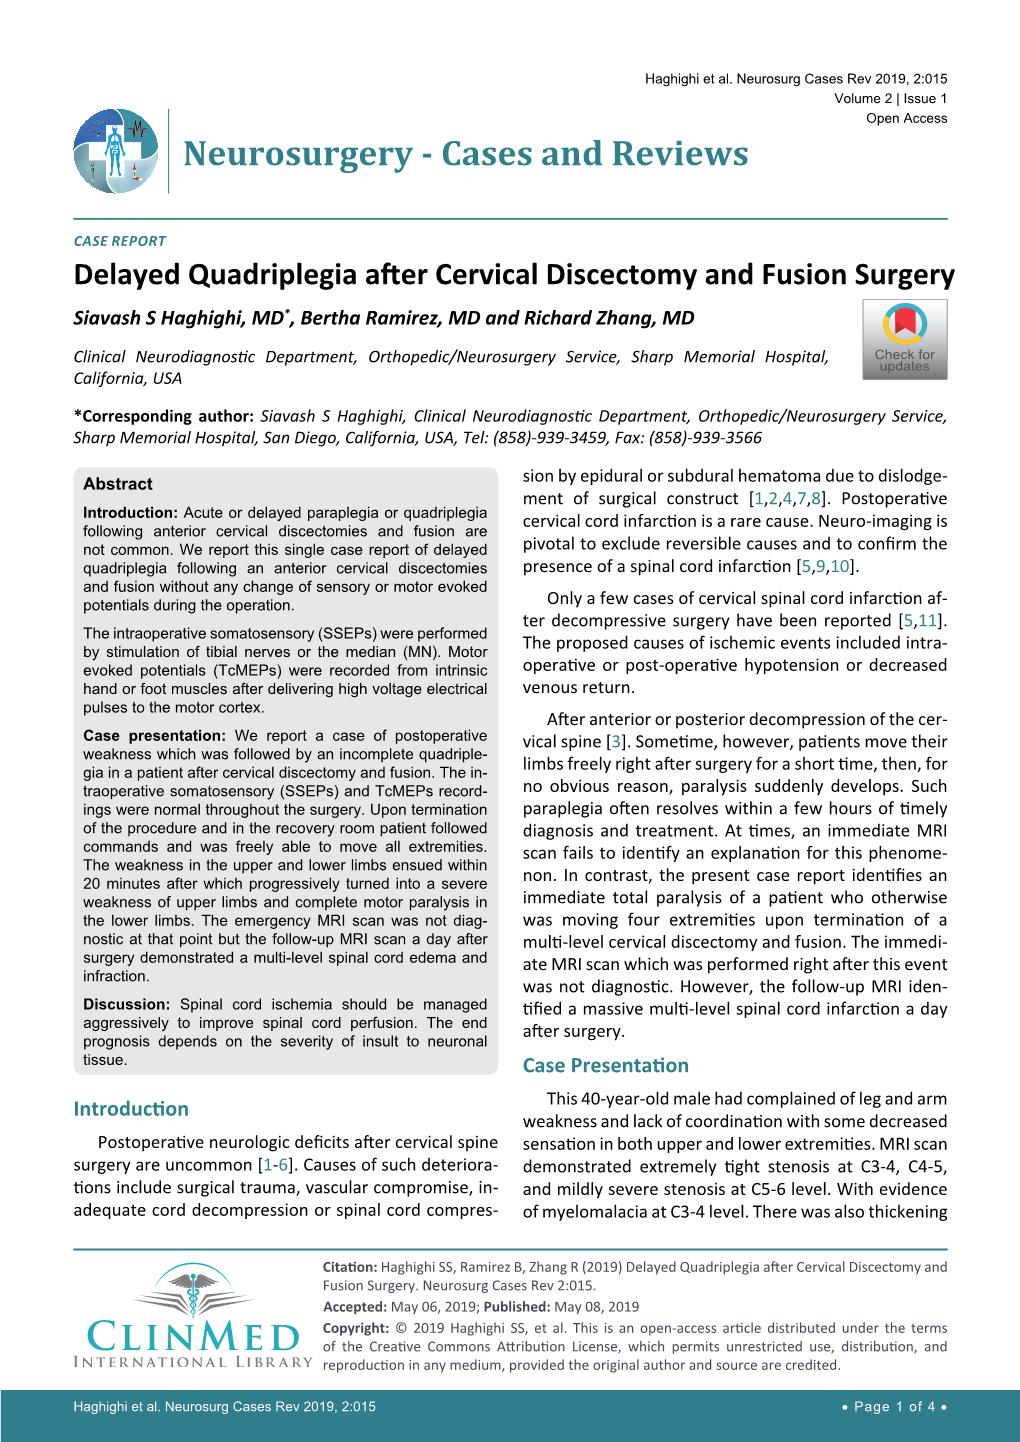 Delayed Quadriplegia After Cervical Discectomy and Fusion Surgery Siavash S Haghighi, MD*, Bertha Ramirez, MD and Richard Zhang, MD